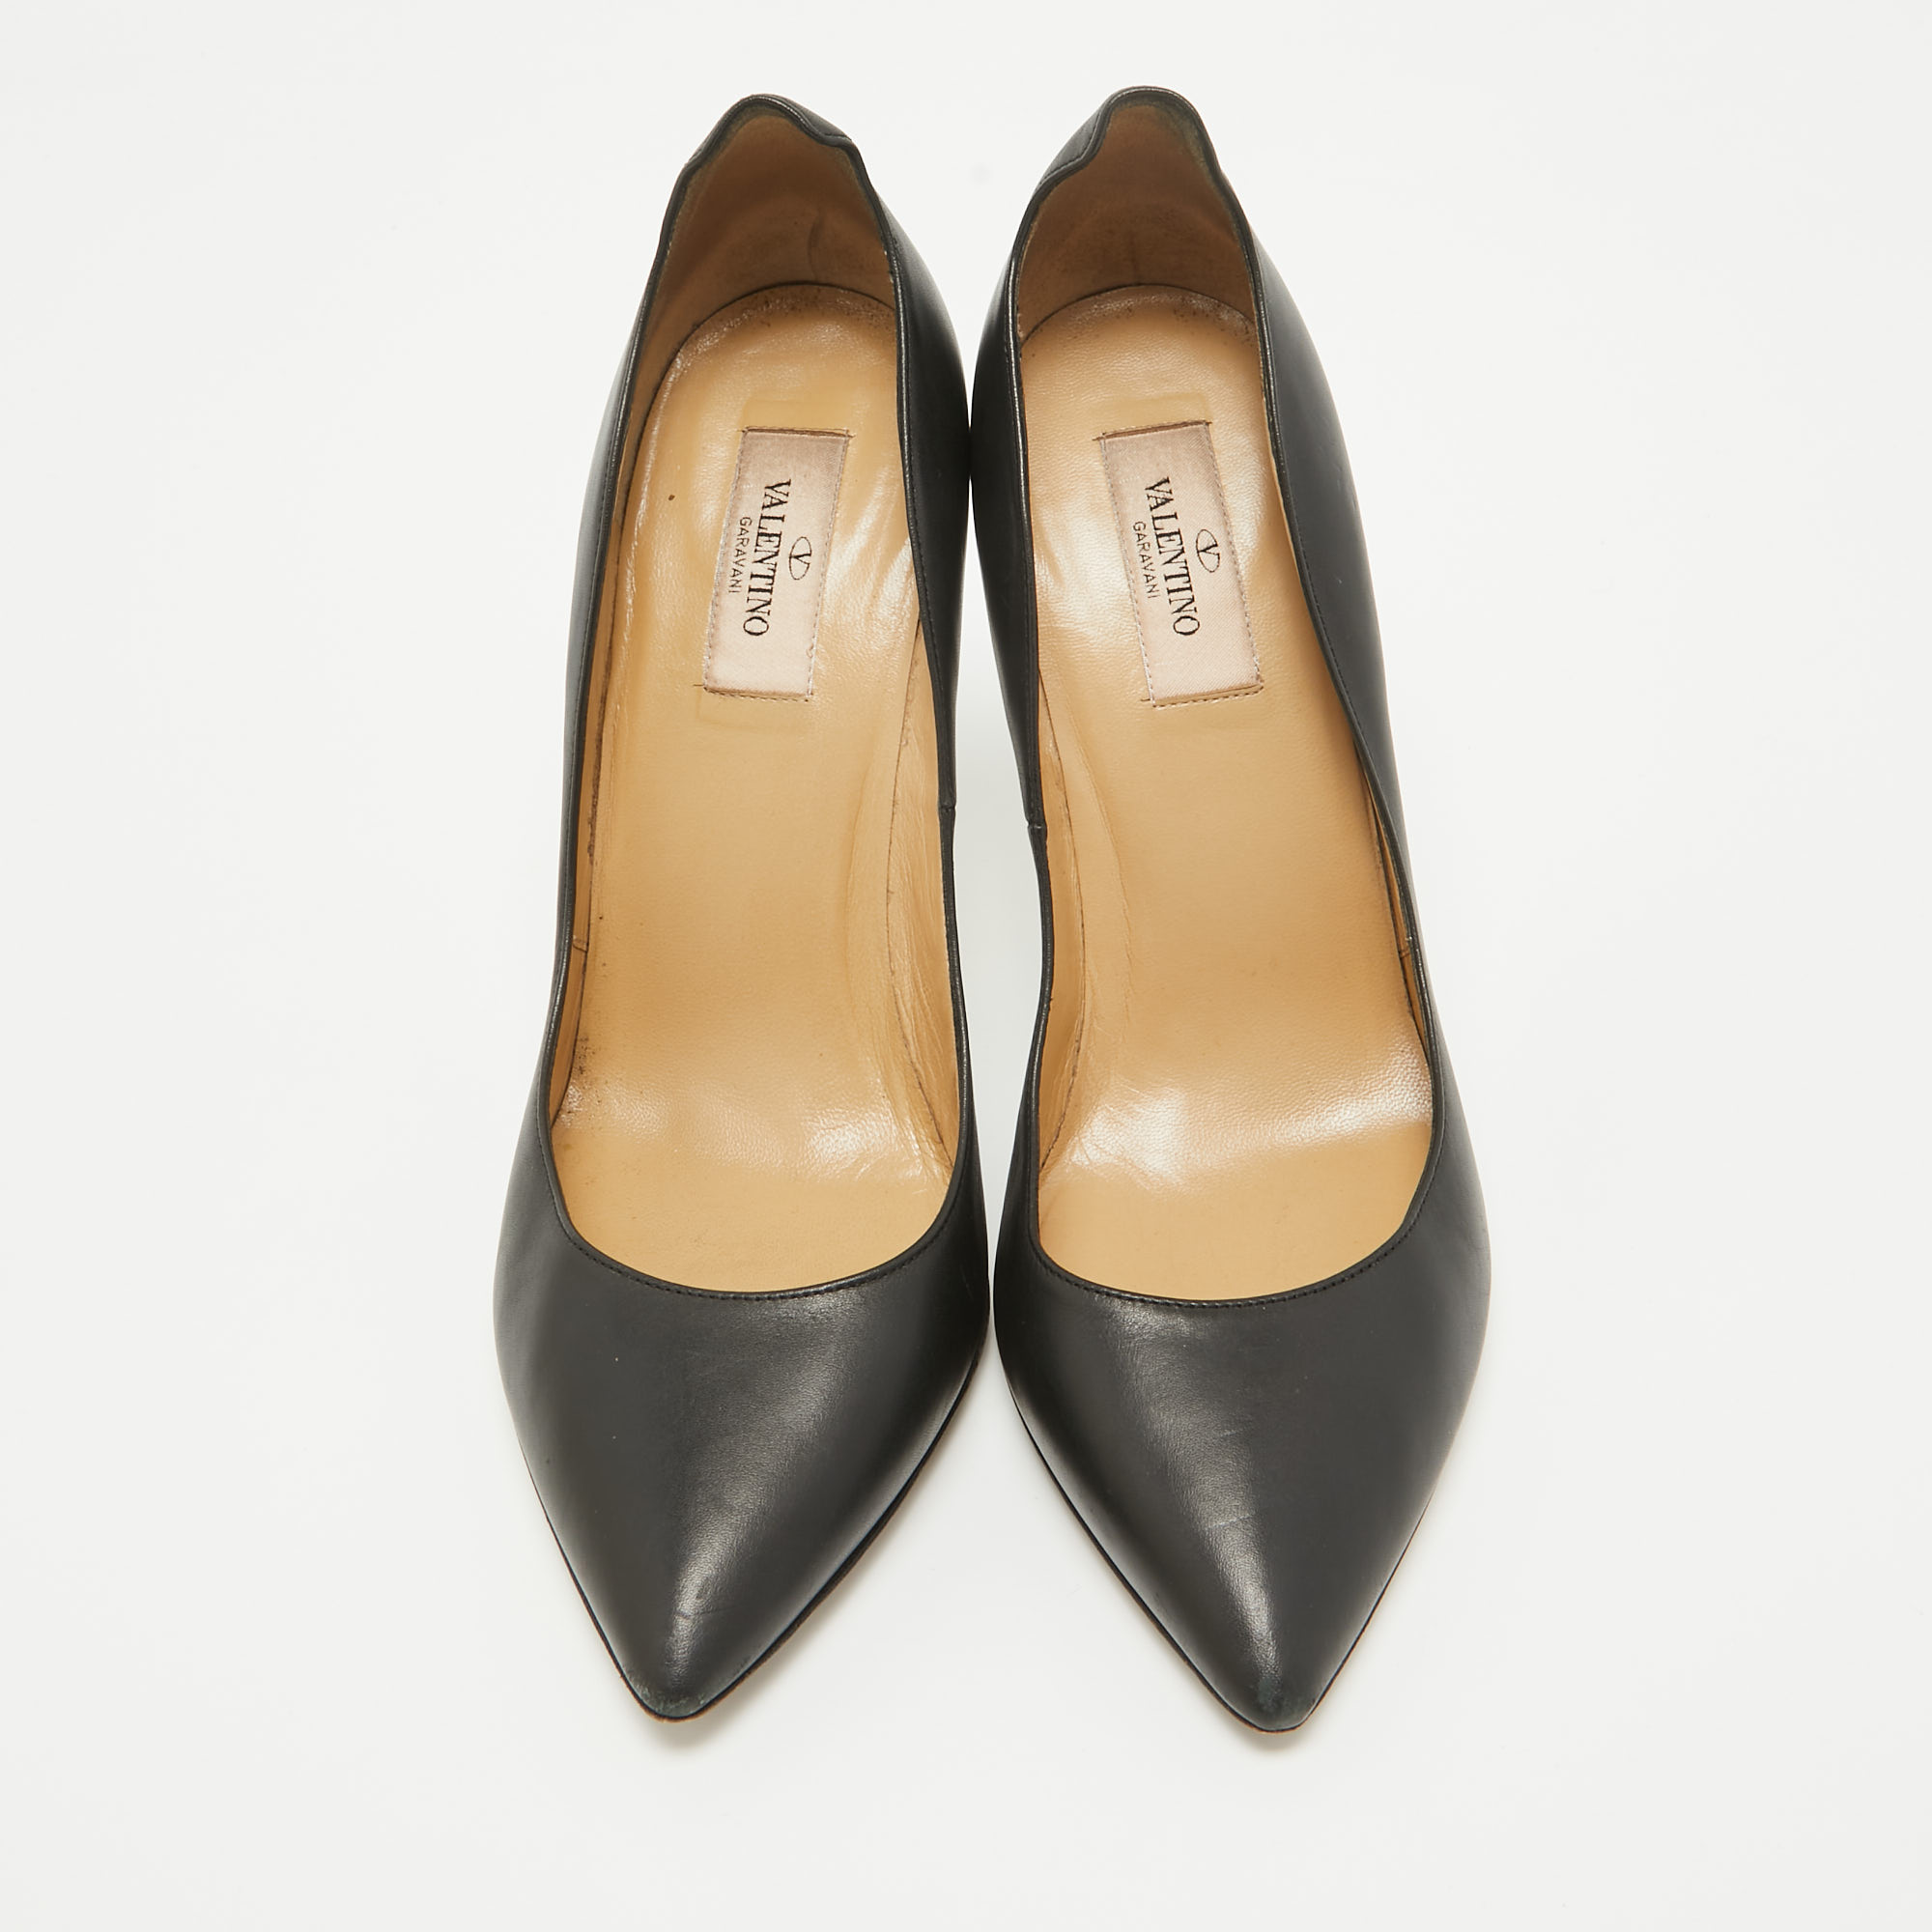 Valentino Black Leather Rockstud Pointed Toe Pumps Size 39.5